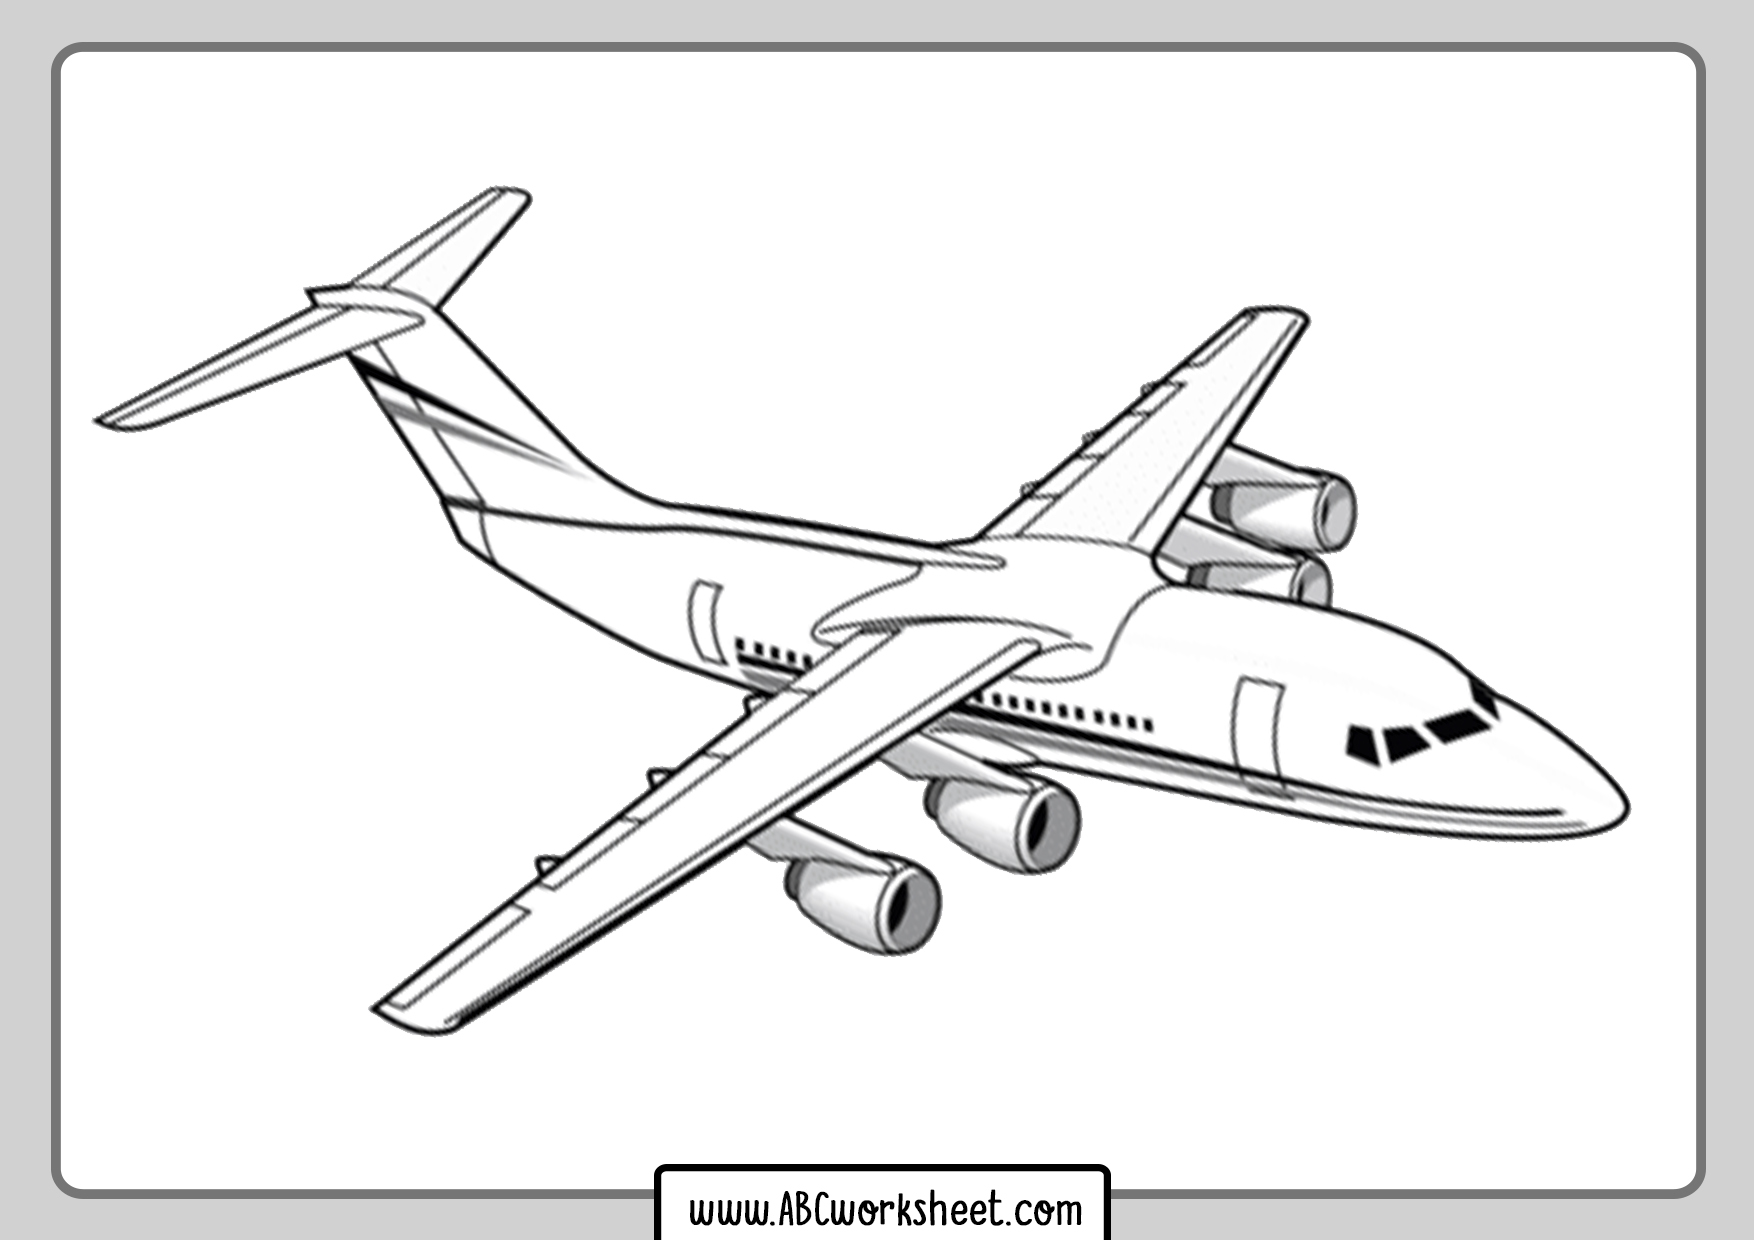 10-free-airplane-coloring-pages-for-kids-free-printable-airplane